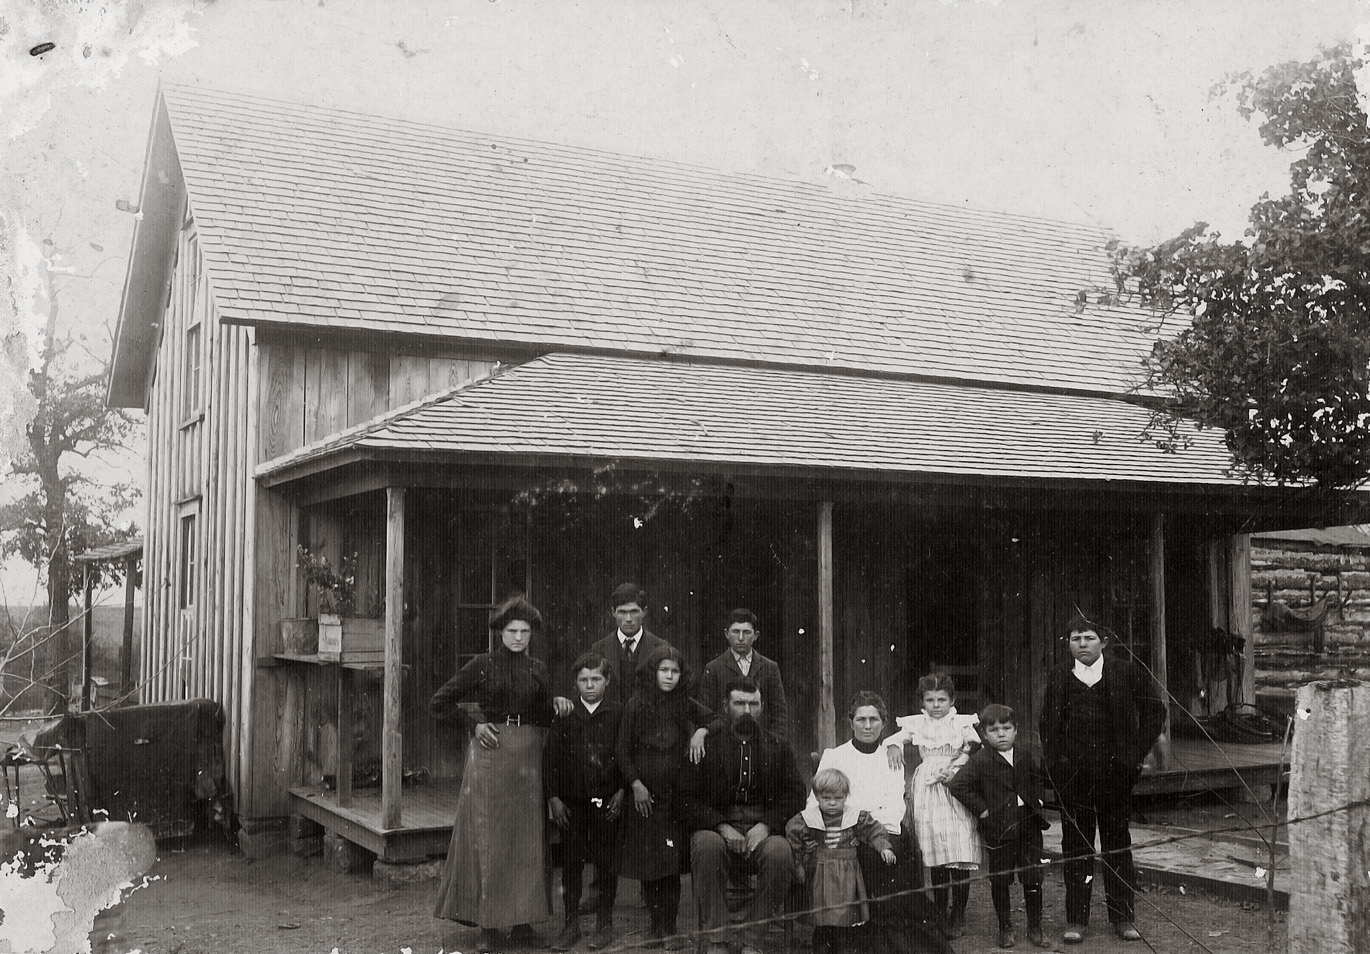 I purchased a group of images over the weekend at an event called Trade Days at Tannihill Ironworks Historical State Park in McCalla, Alabama. This photo was among them. I do not know where it was taken but some of the other images in the group indicate that they are of the Taylor family. One of the photos was dated 1906 and was signed Walter Taylor, Elmira NY. Another photo said it was from Okla. View full size.